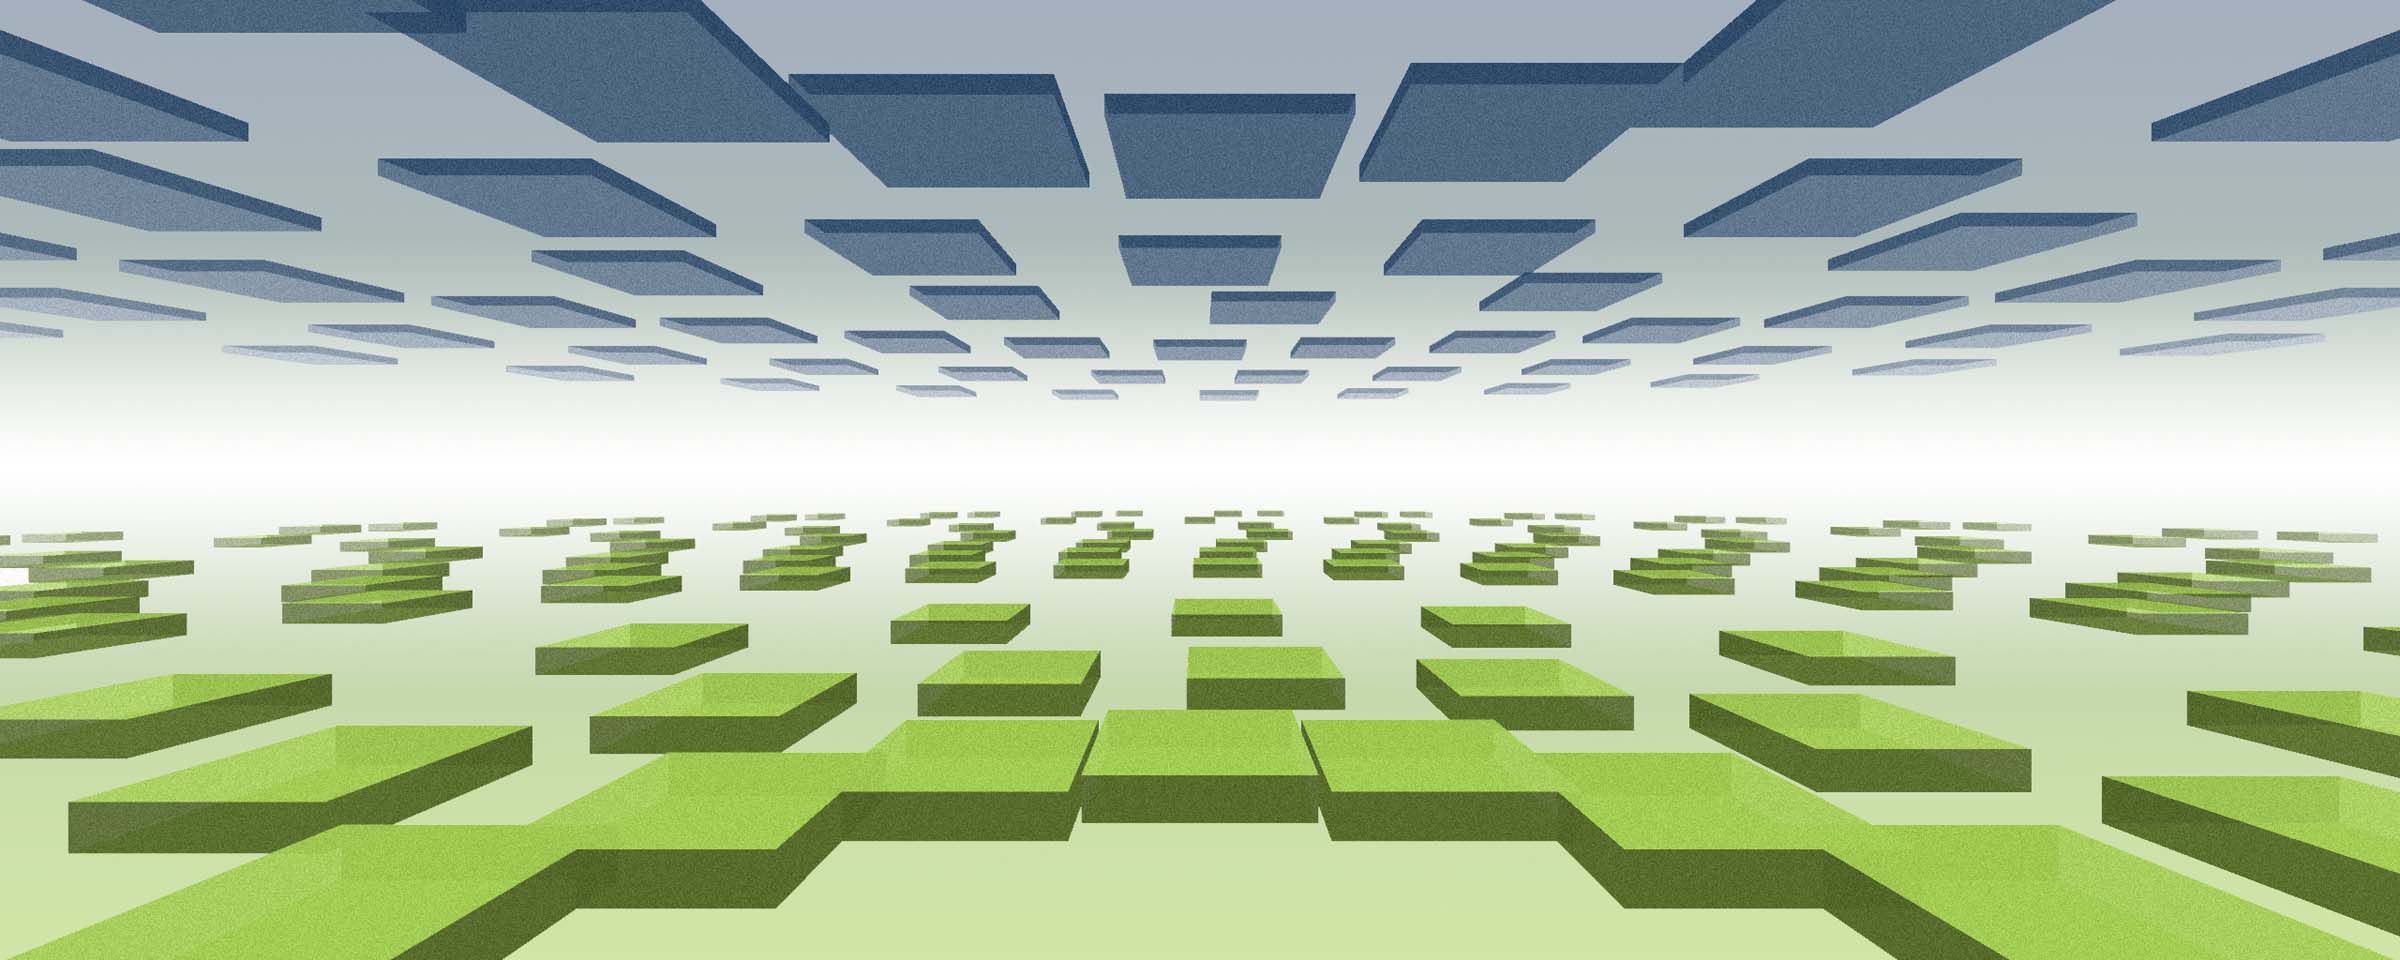 abstract image of green cubes below and blue cubes above fading into distant horizon